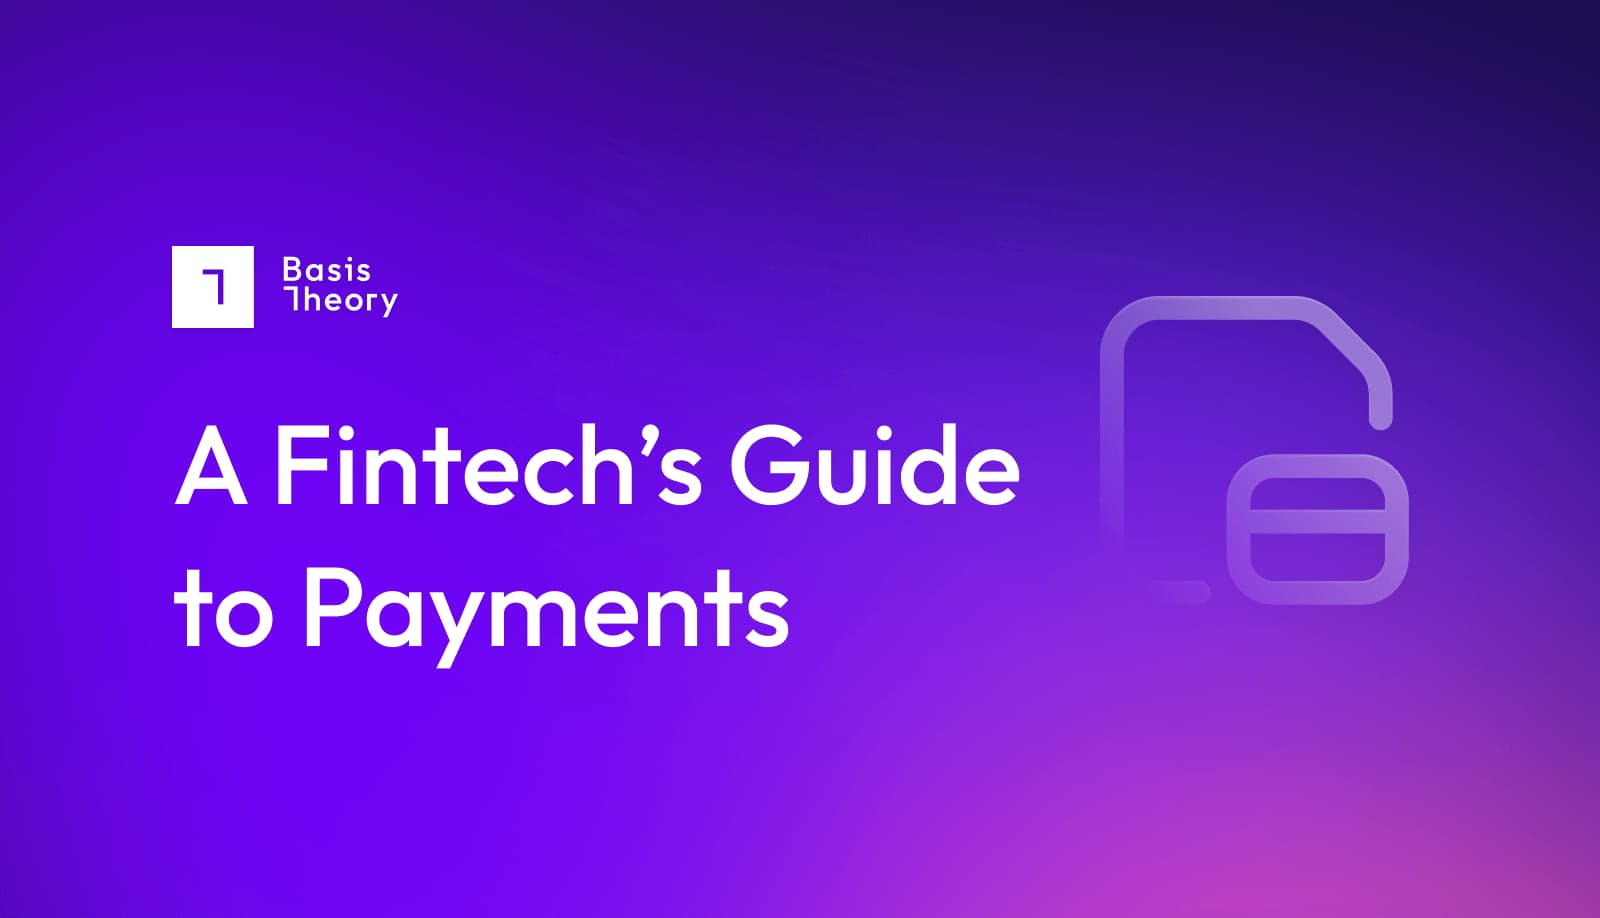 A Fintech's Guide to Payments